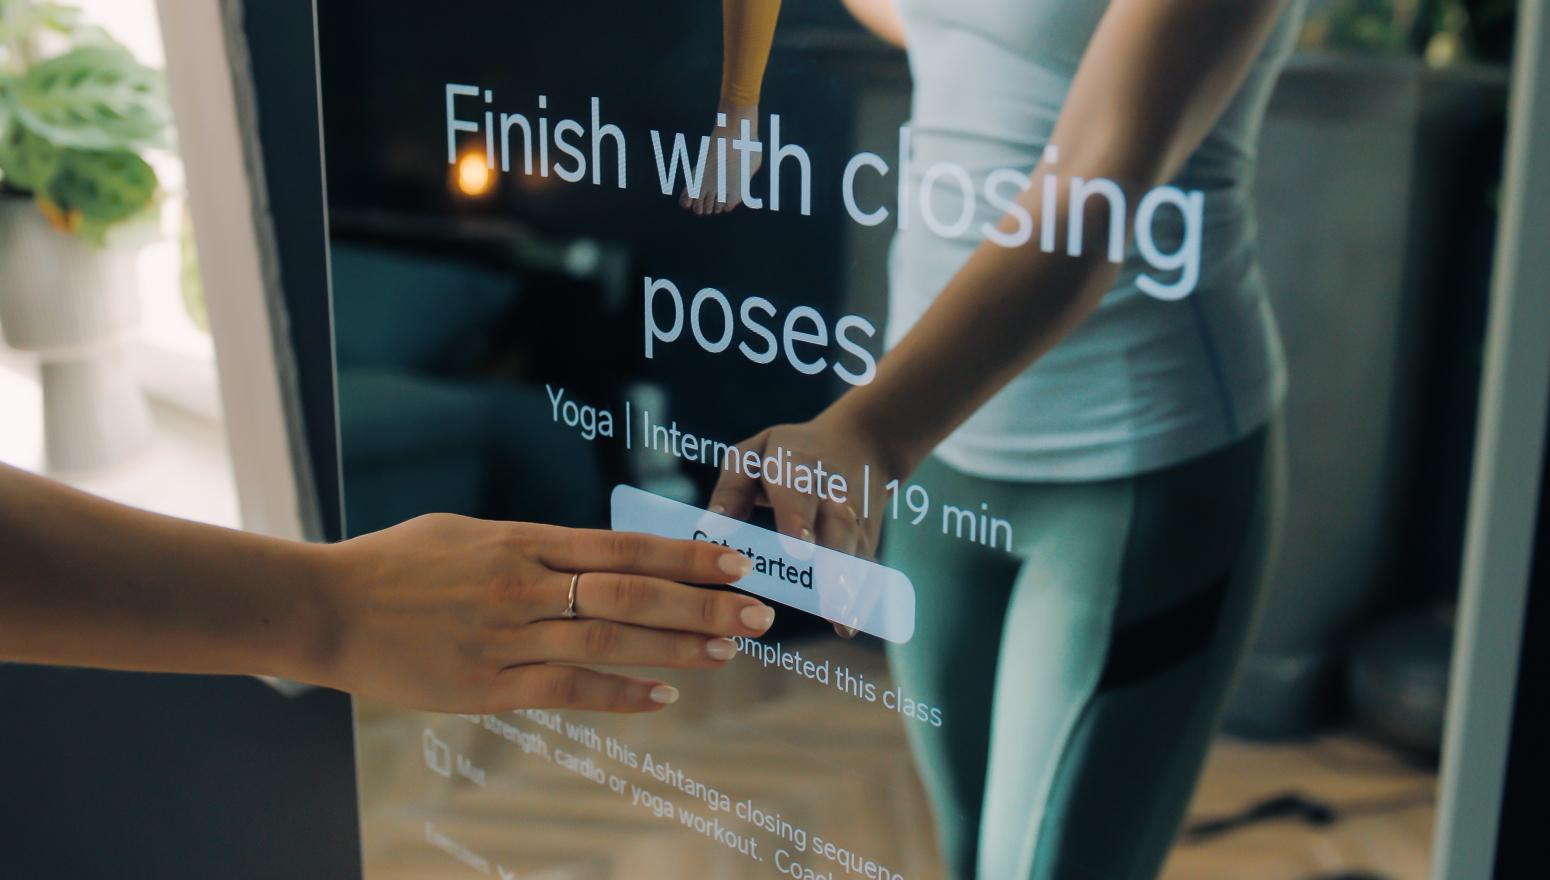 The interactive fitness mirror